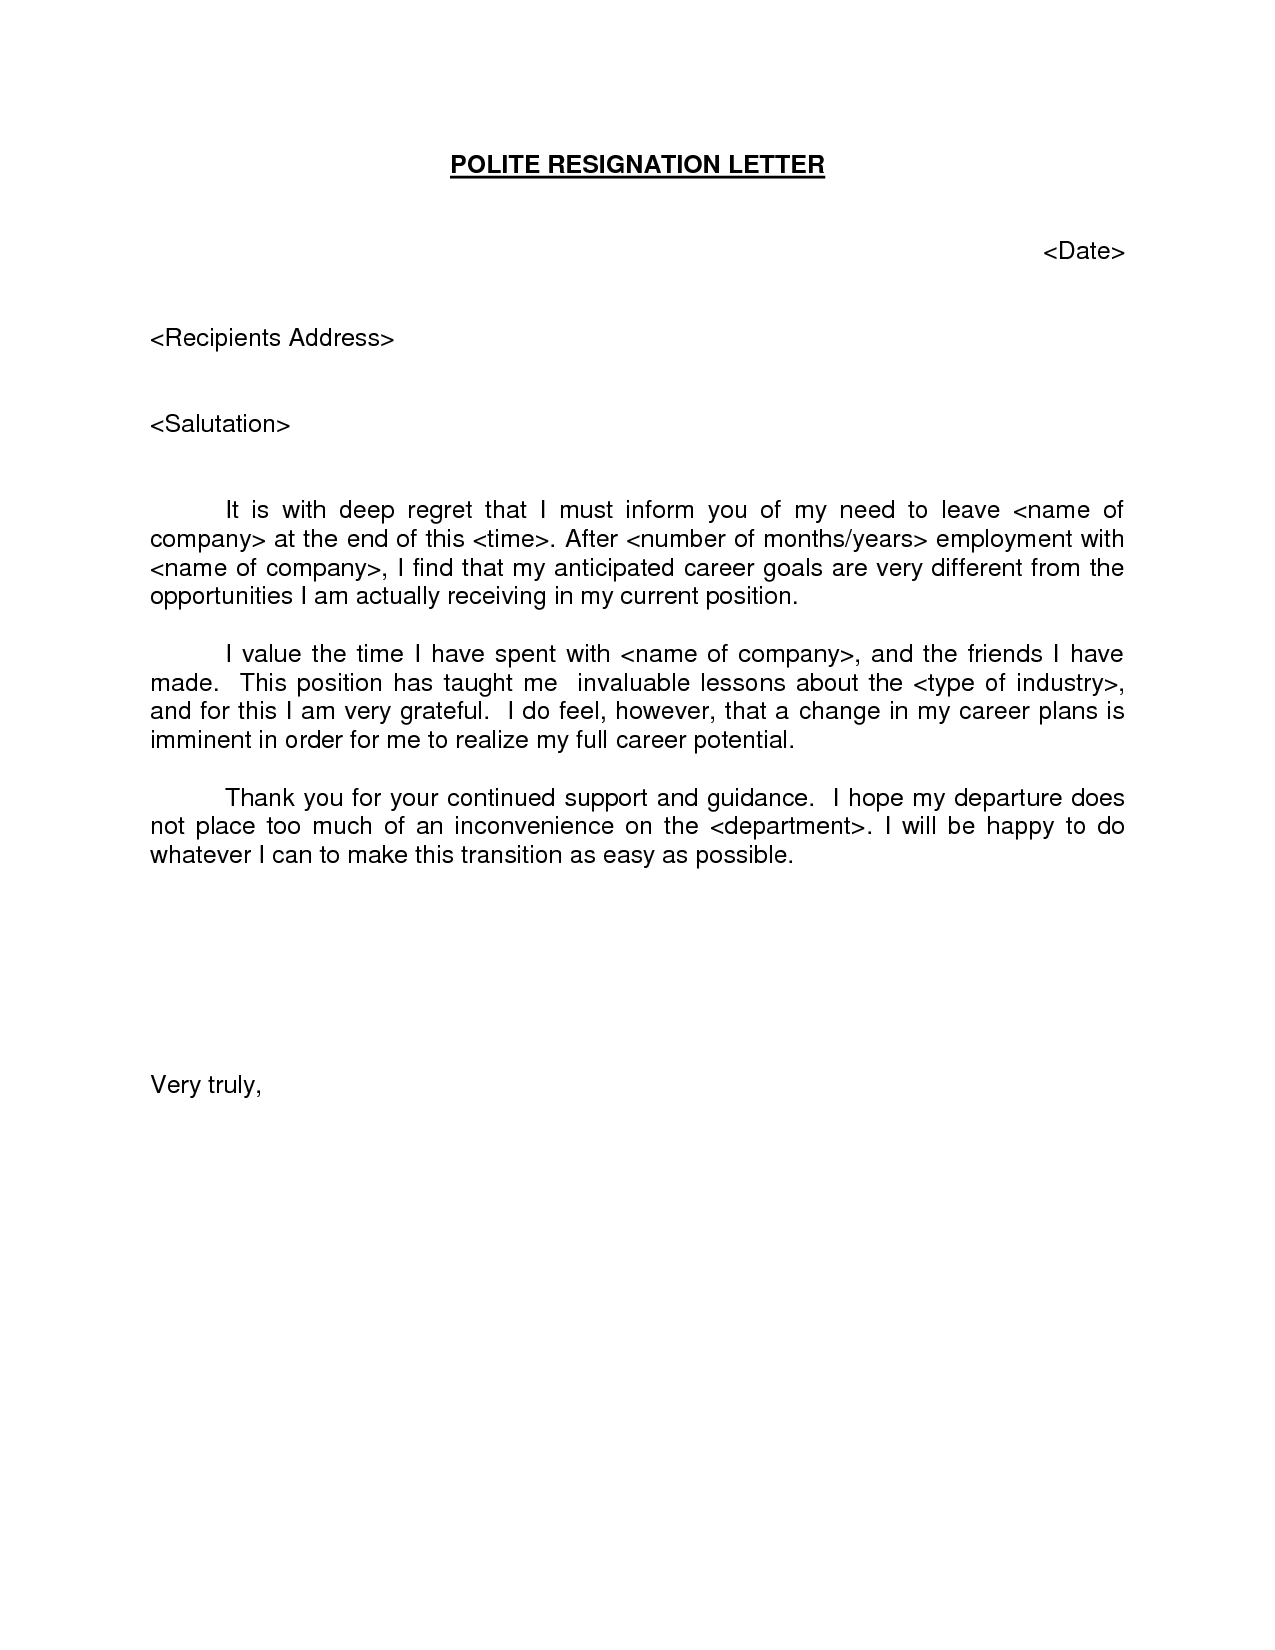 Writing A Resignation Letter Template - Polite Resignation Letter Bestdealformoneywriting A Letter